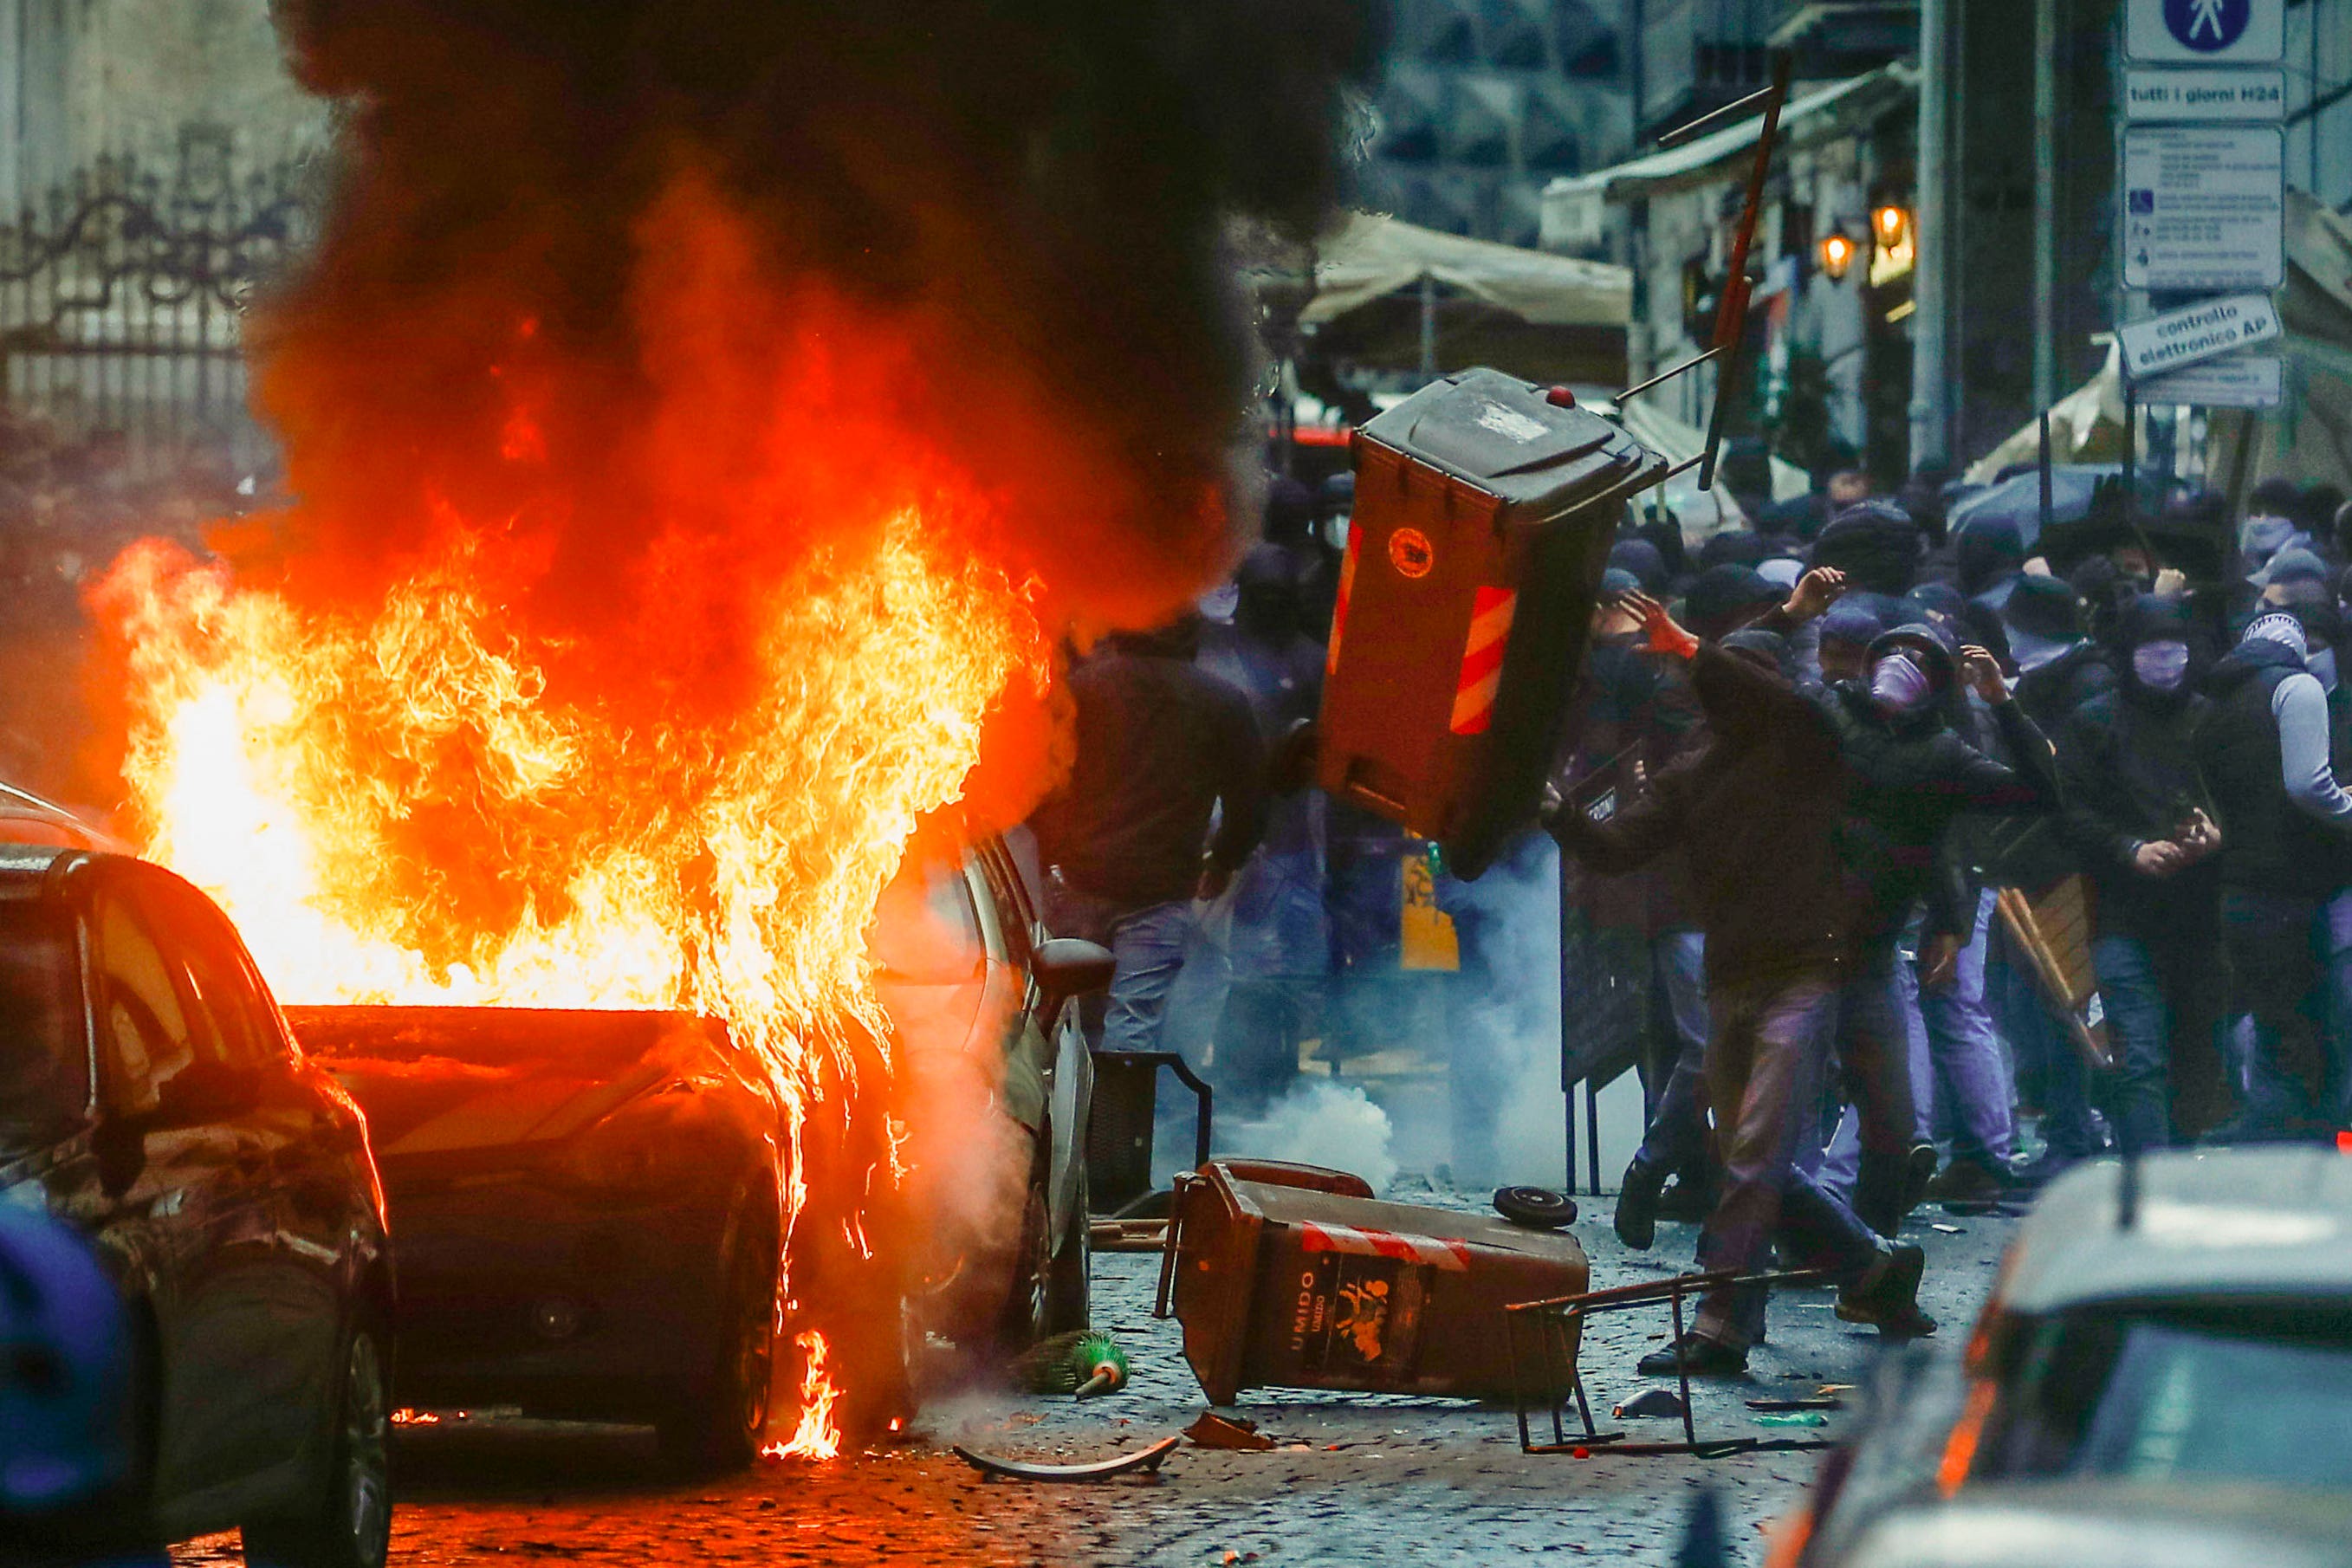 Frankfurt supporters clashed with police in Naples